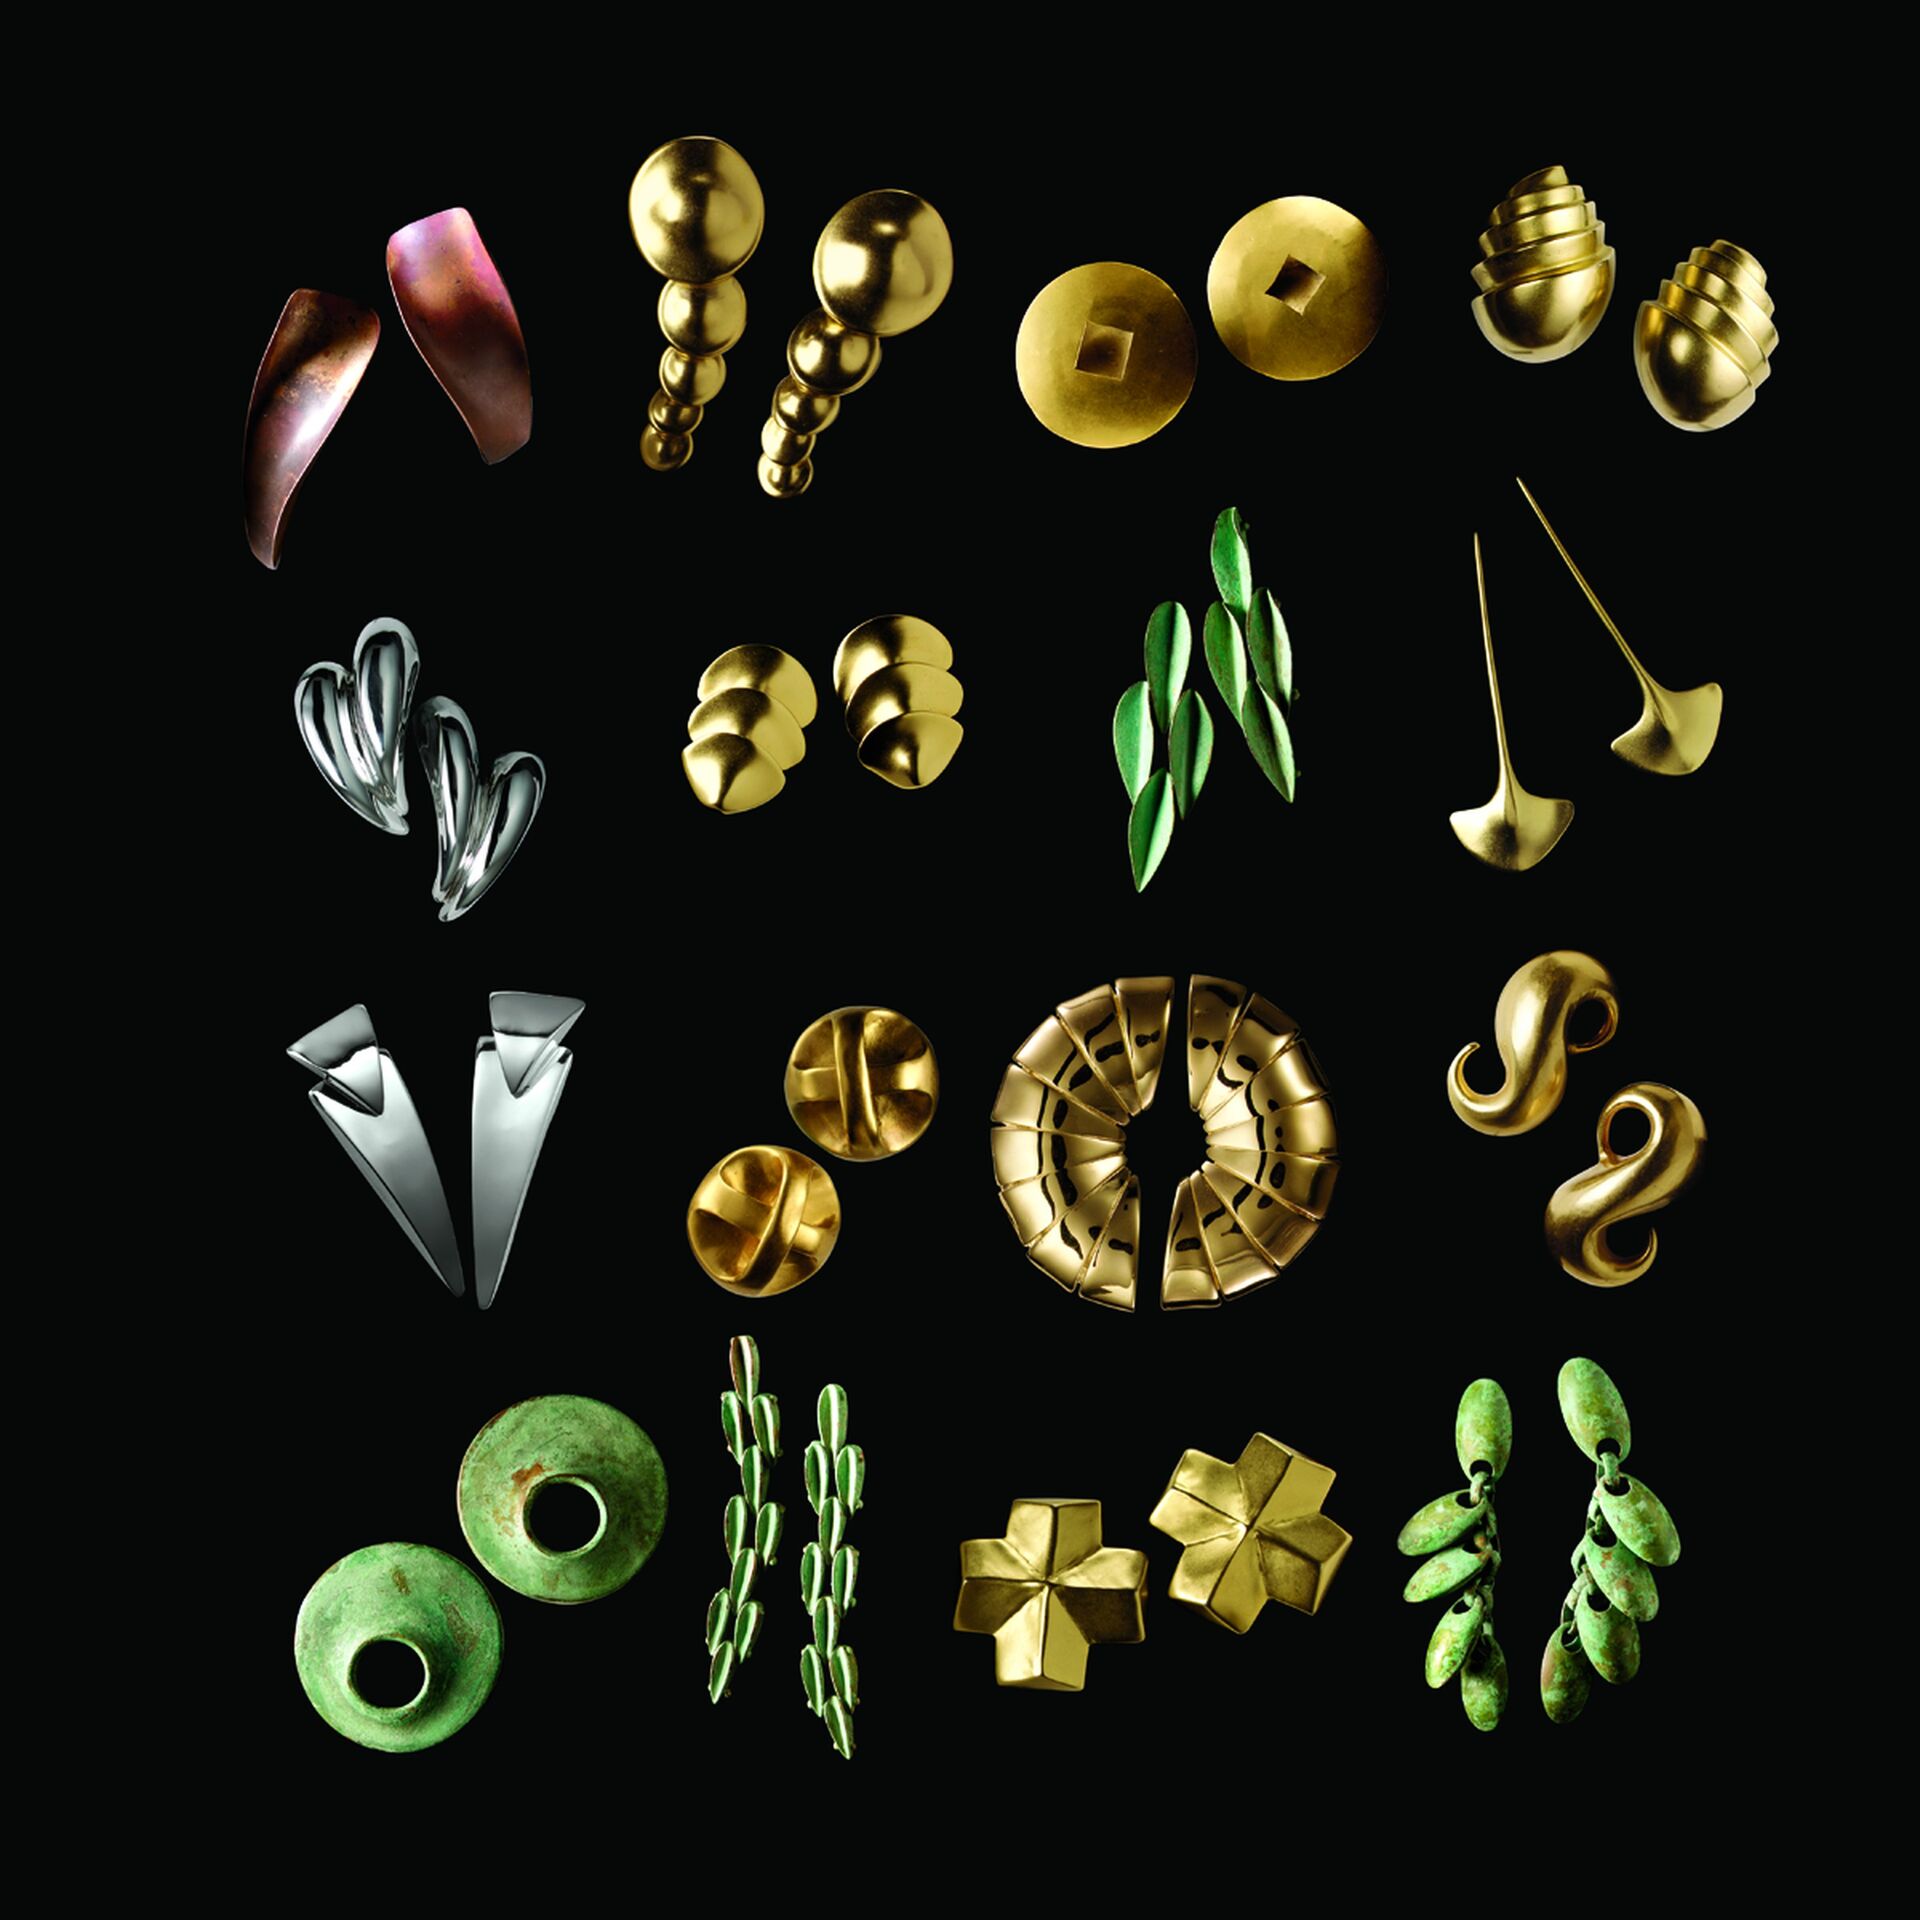 Collage of gold, silver, and green jewelry pieces